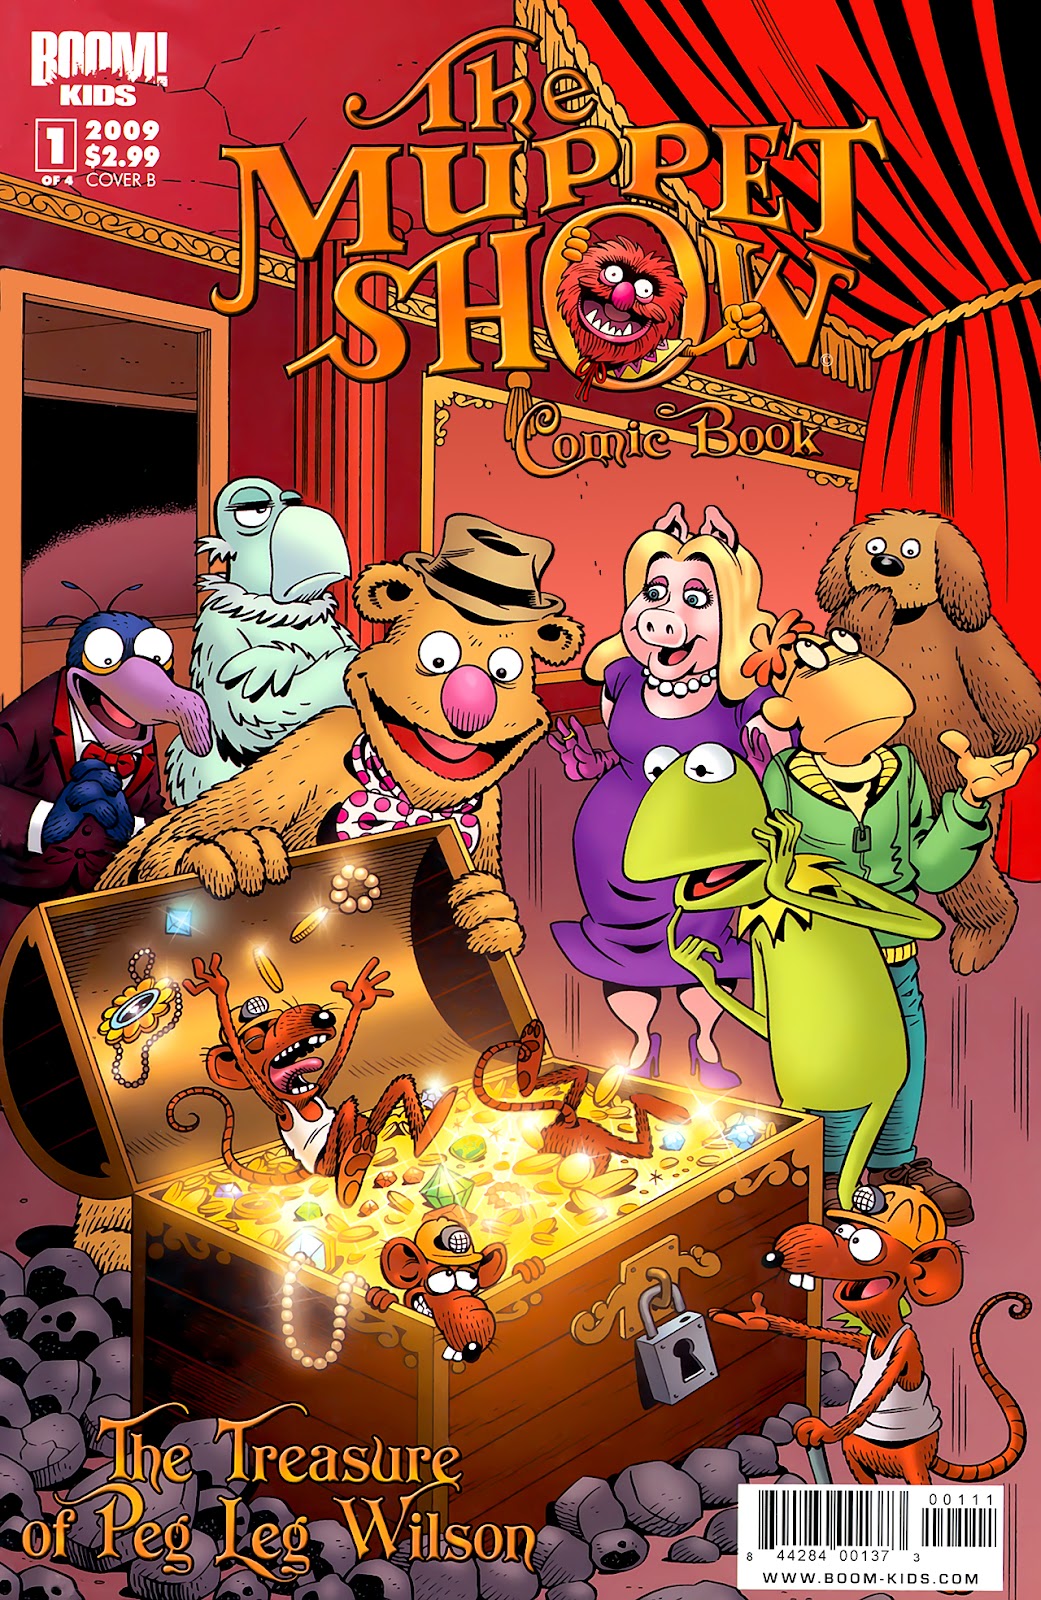 The Muppet Show: The Treasure of Peg-Leg Wilson issue 1 - Page 1